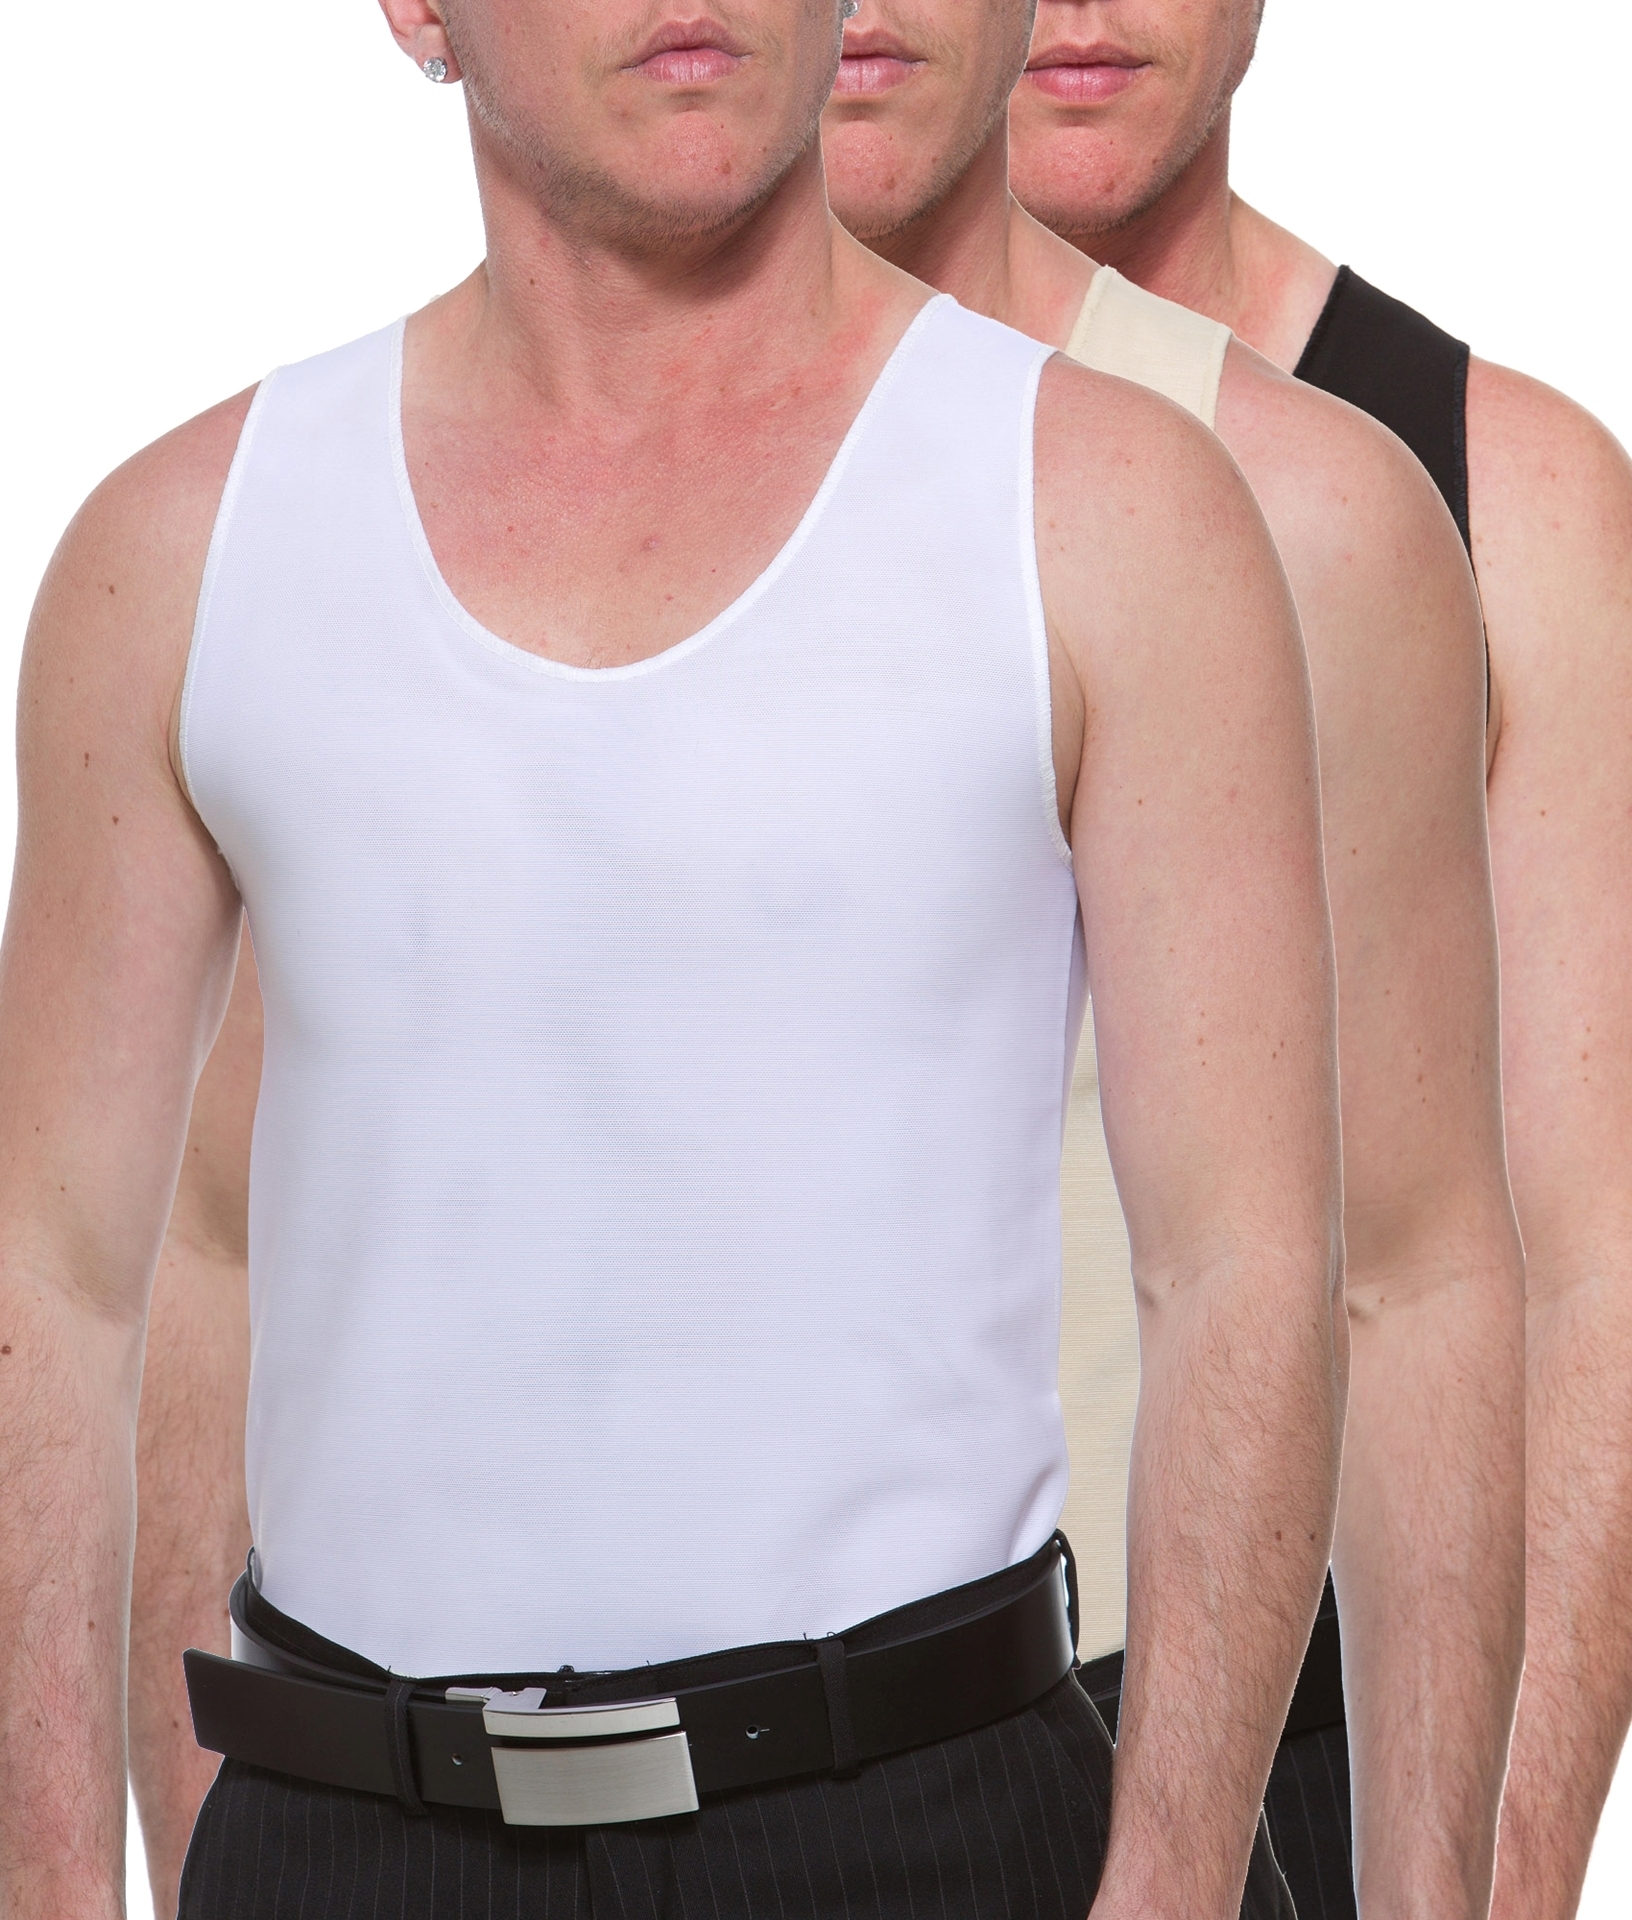 FTM Ultimate Chest Binder Tank by Underworks. FTM Chest Binders